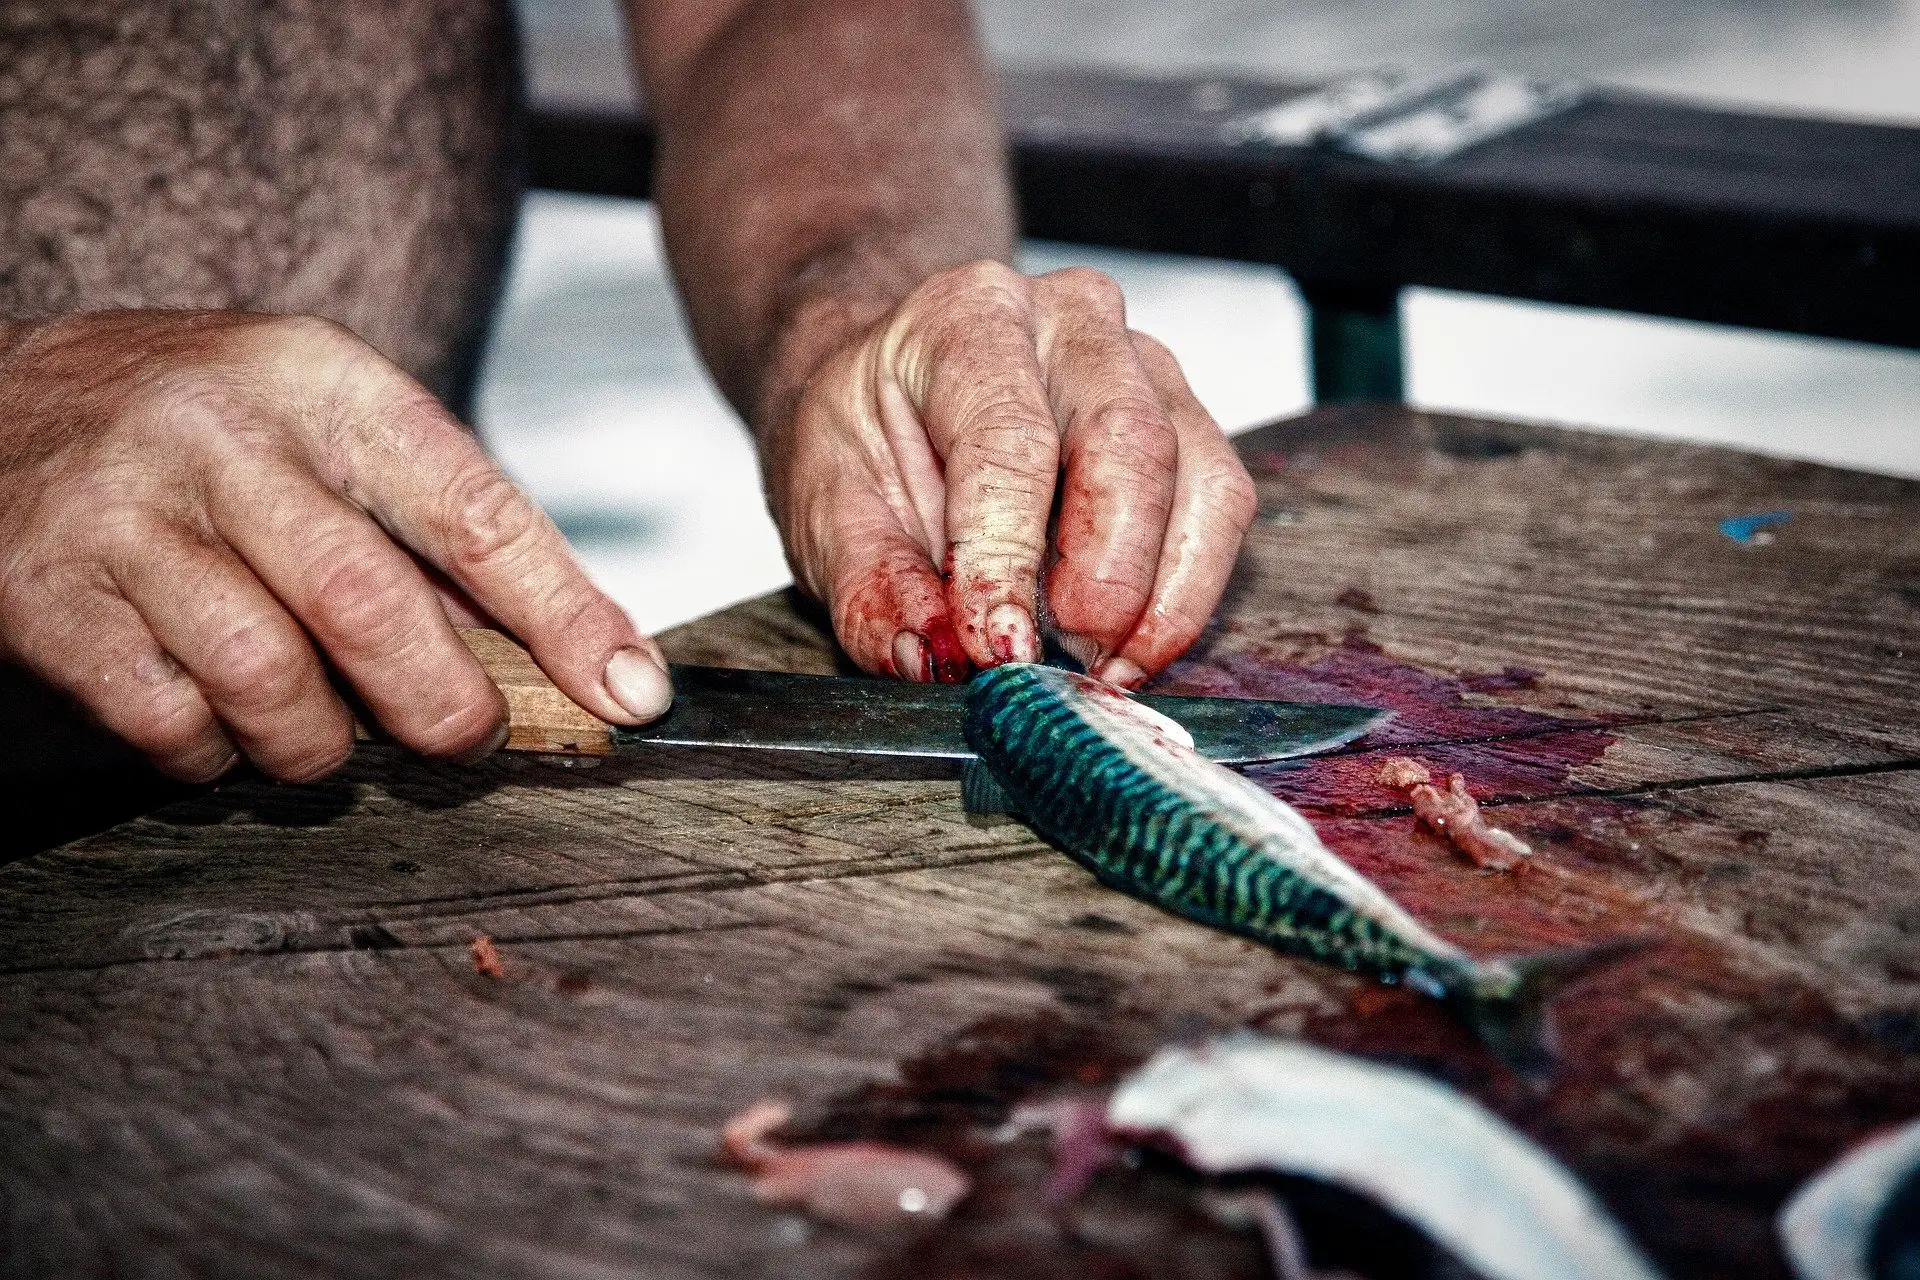 A person filleting a small fish on a table